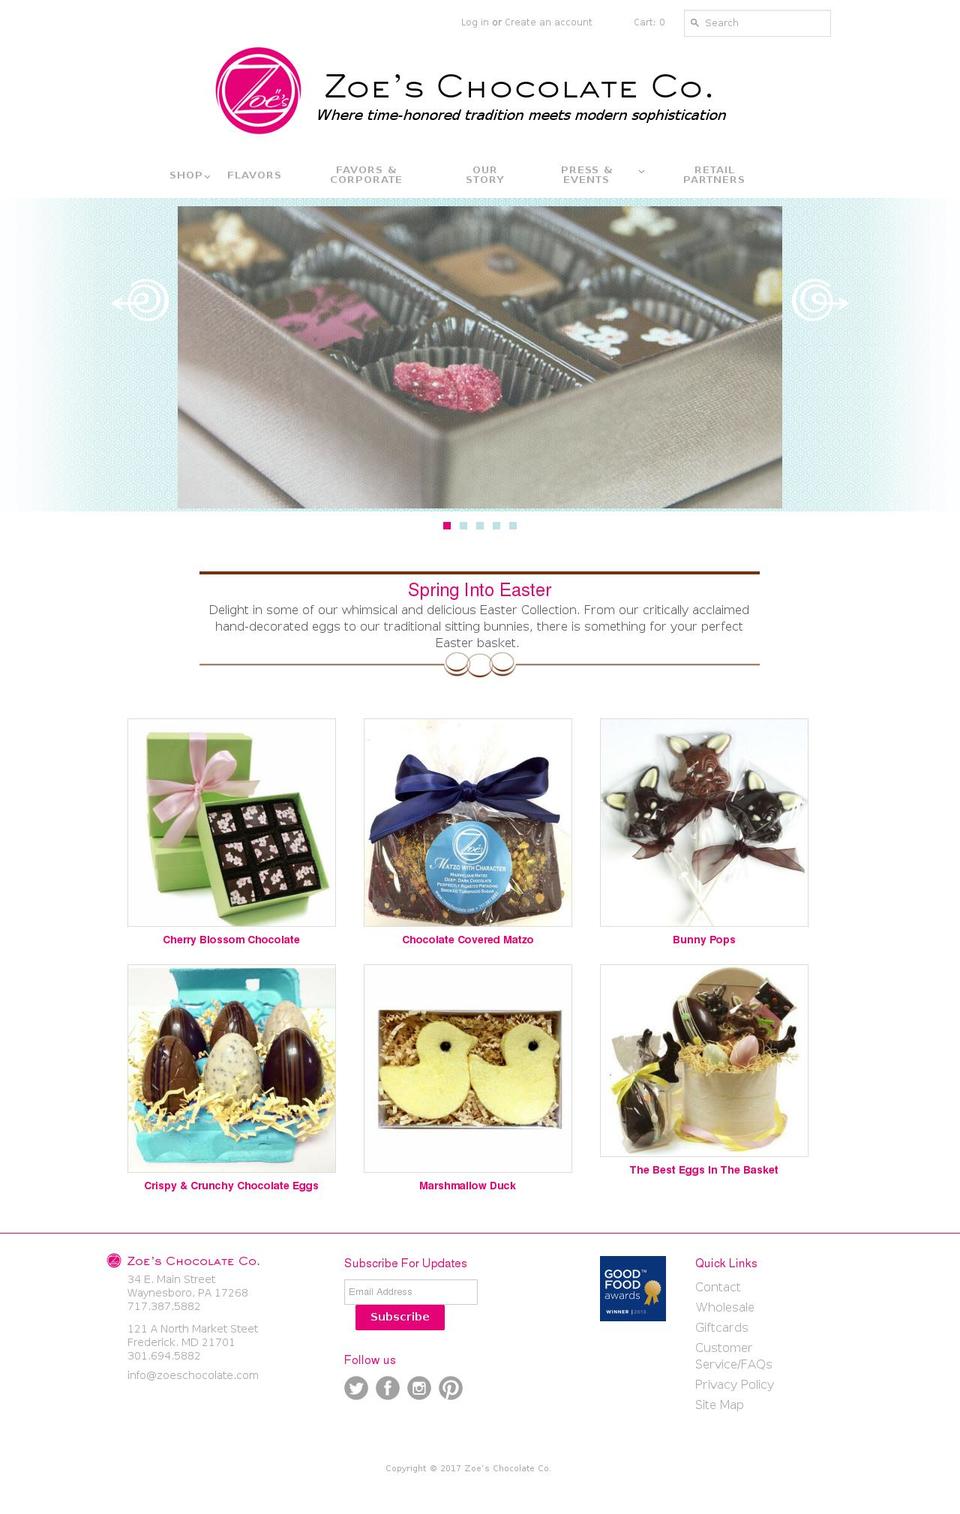 Wholesale Shopify theme site example zoeschocolate.com